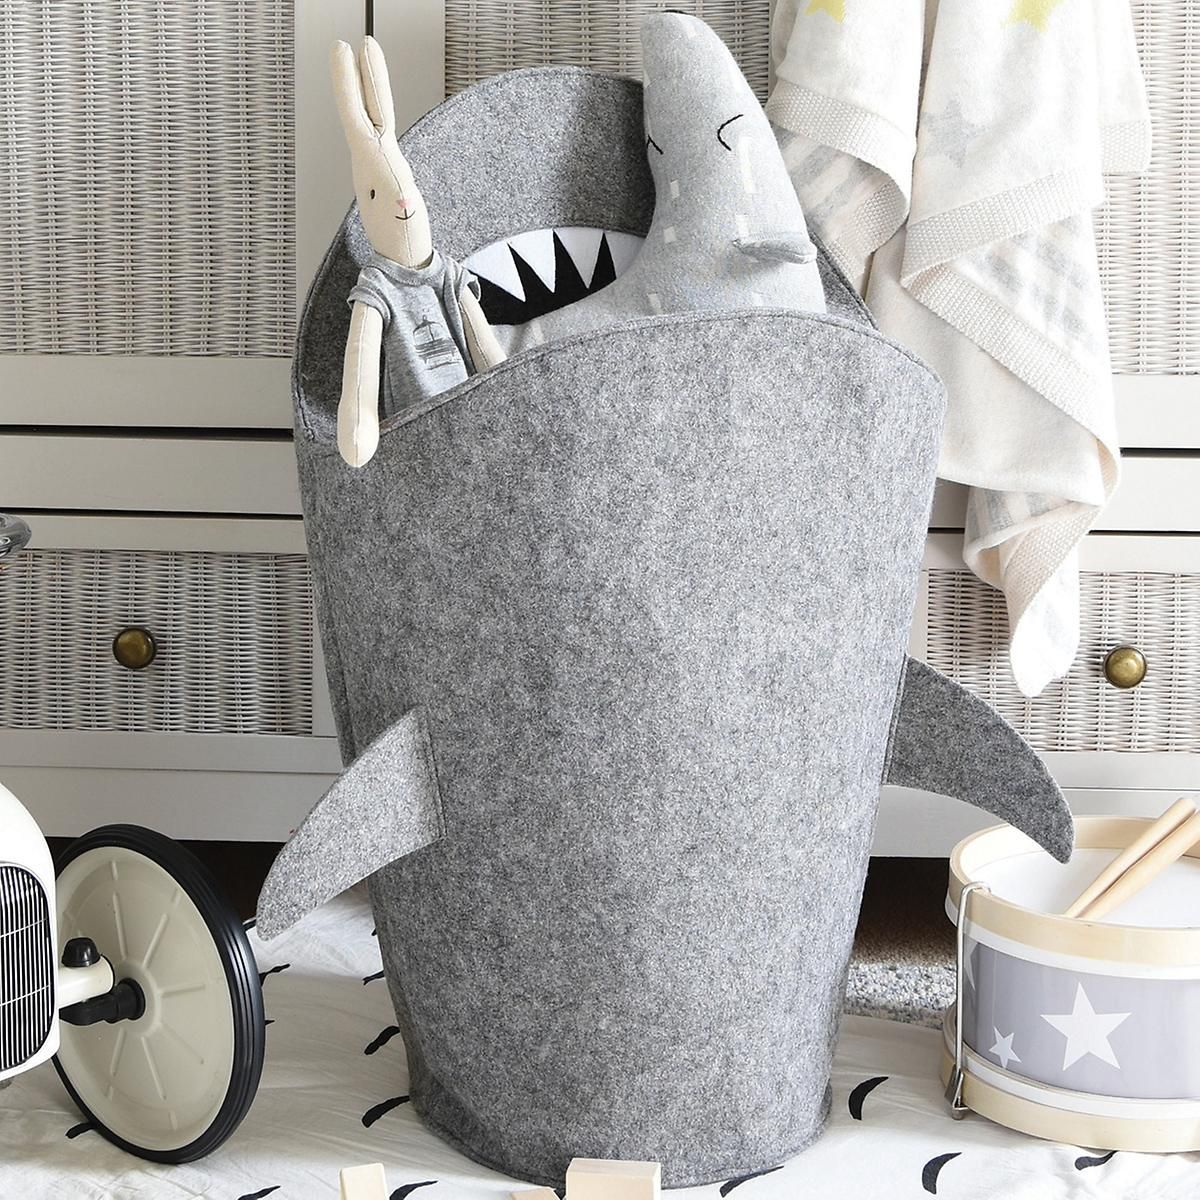 Little Stackers Shark Hamper | The Container Store